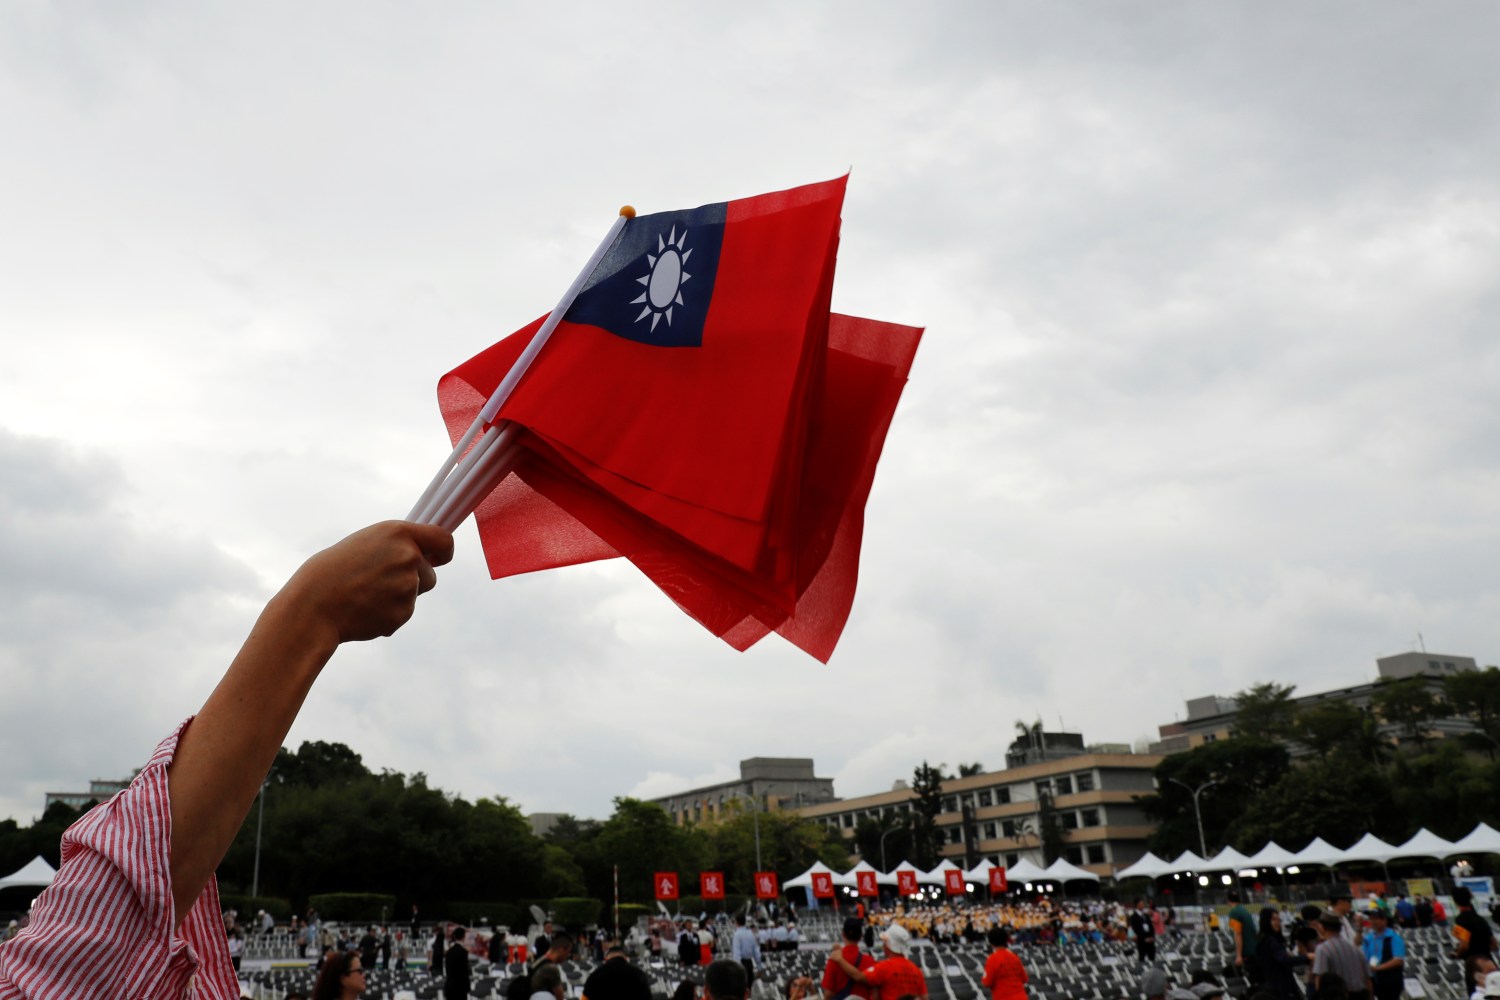 An audience waves Taiwanese flags during the National Day celebrations in Taipei, Taiwan October 10, 2018. REUTERS/Tyrone Siu - RC1A37B136B0